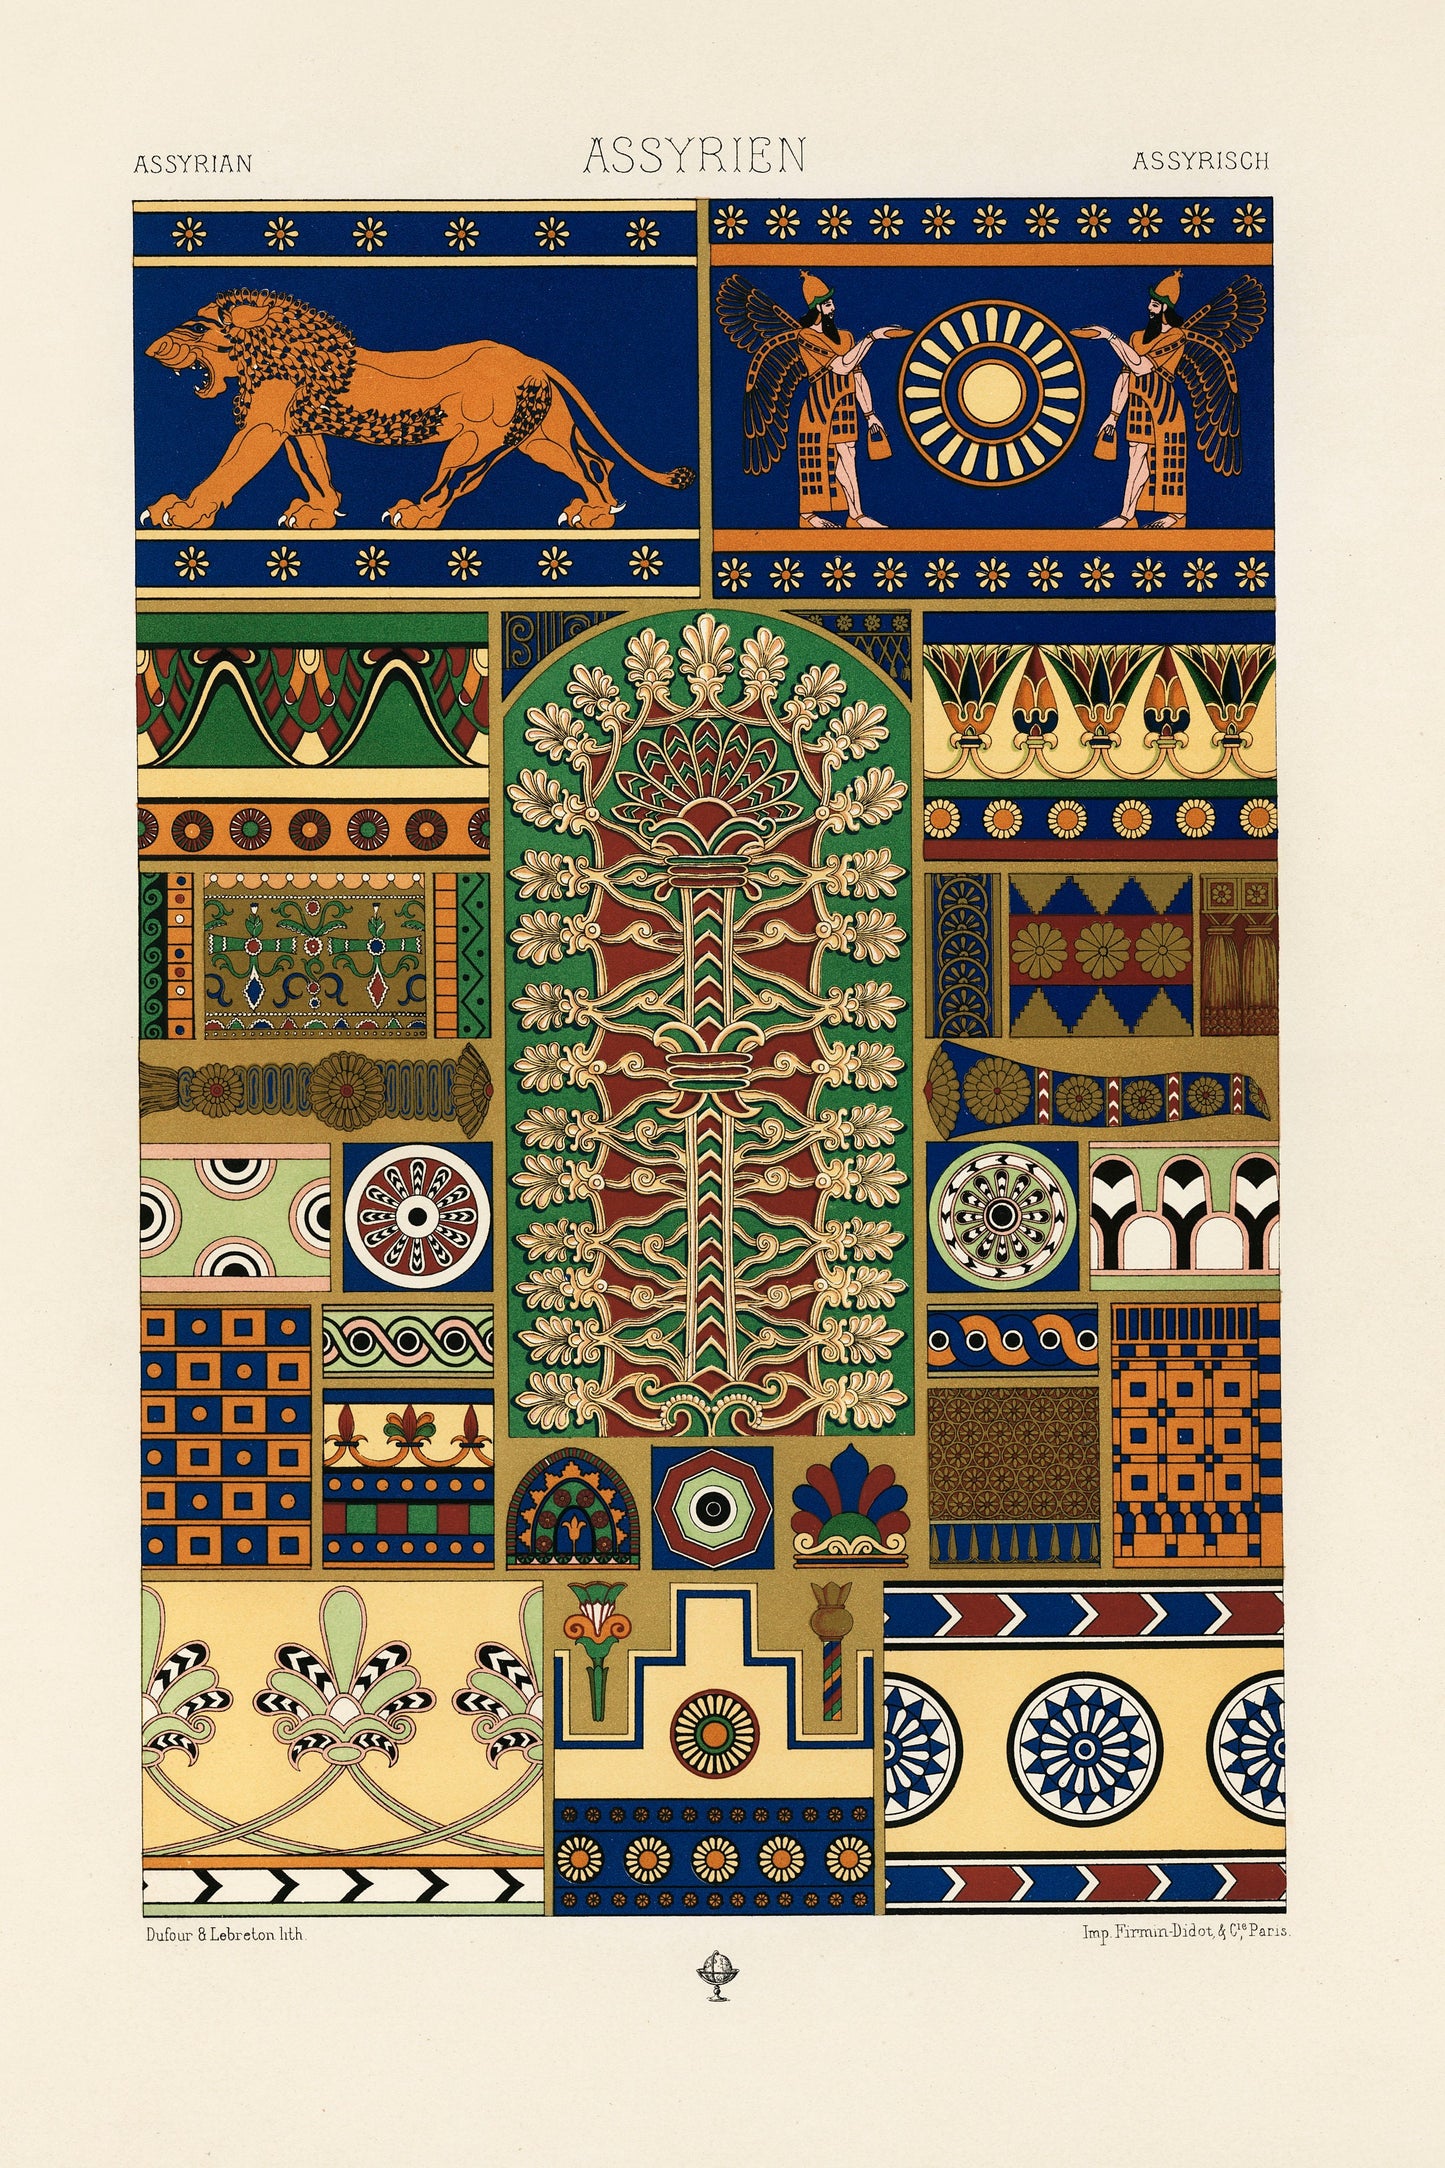 Assyrian pattern from L'ornement Polychrome by Albert Racinet Illustration Poster Print Wall Hanging Decor A4 A3 A2